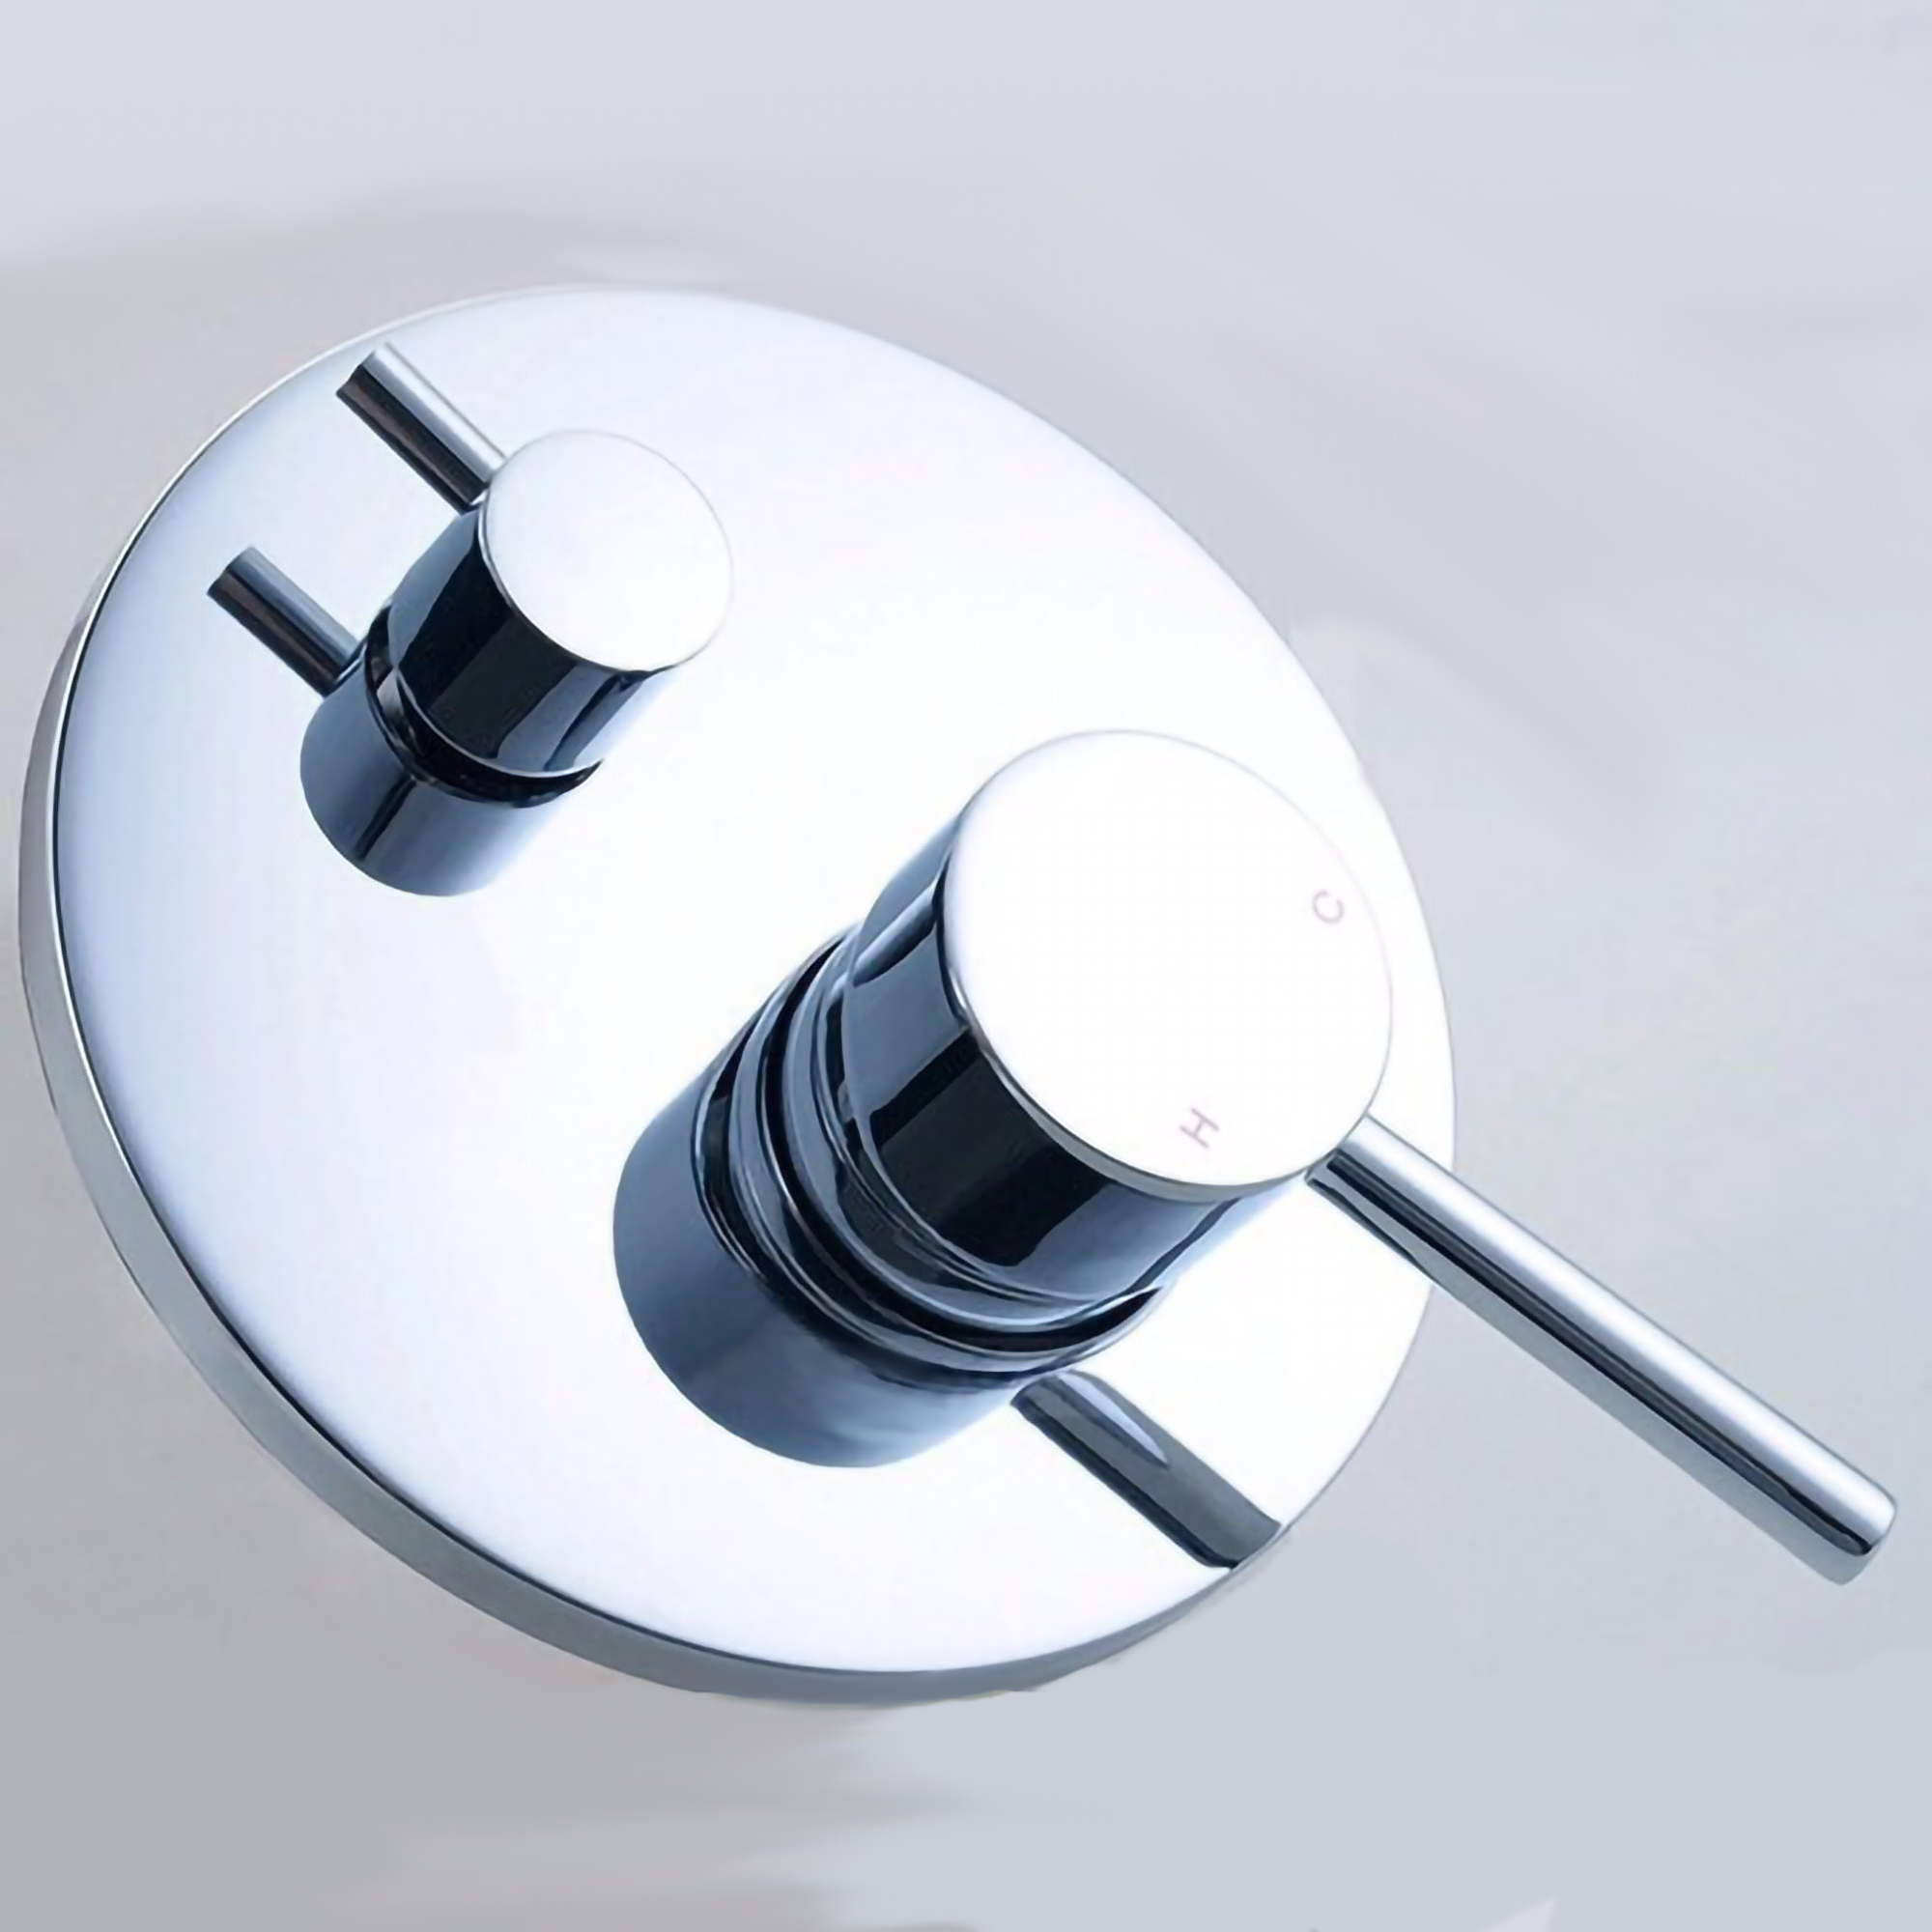 Fontana Prima Shower Valve Mixer 2-Way Concealed Wall Mounted - Chrome Plated Solid Brass Material